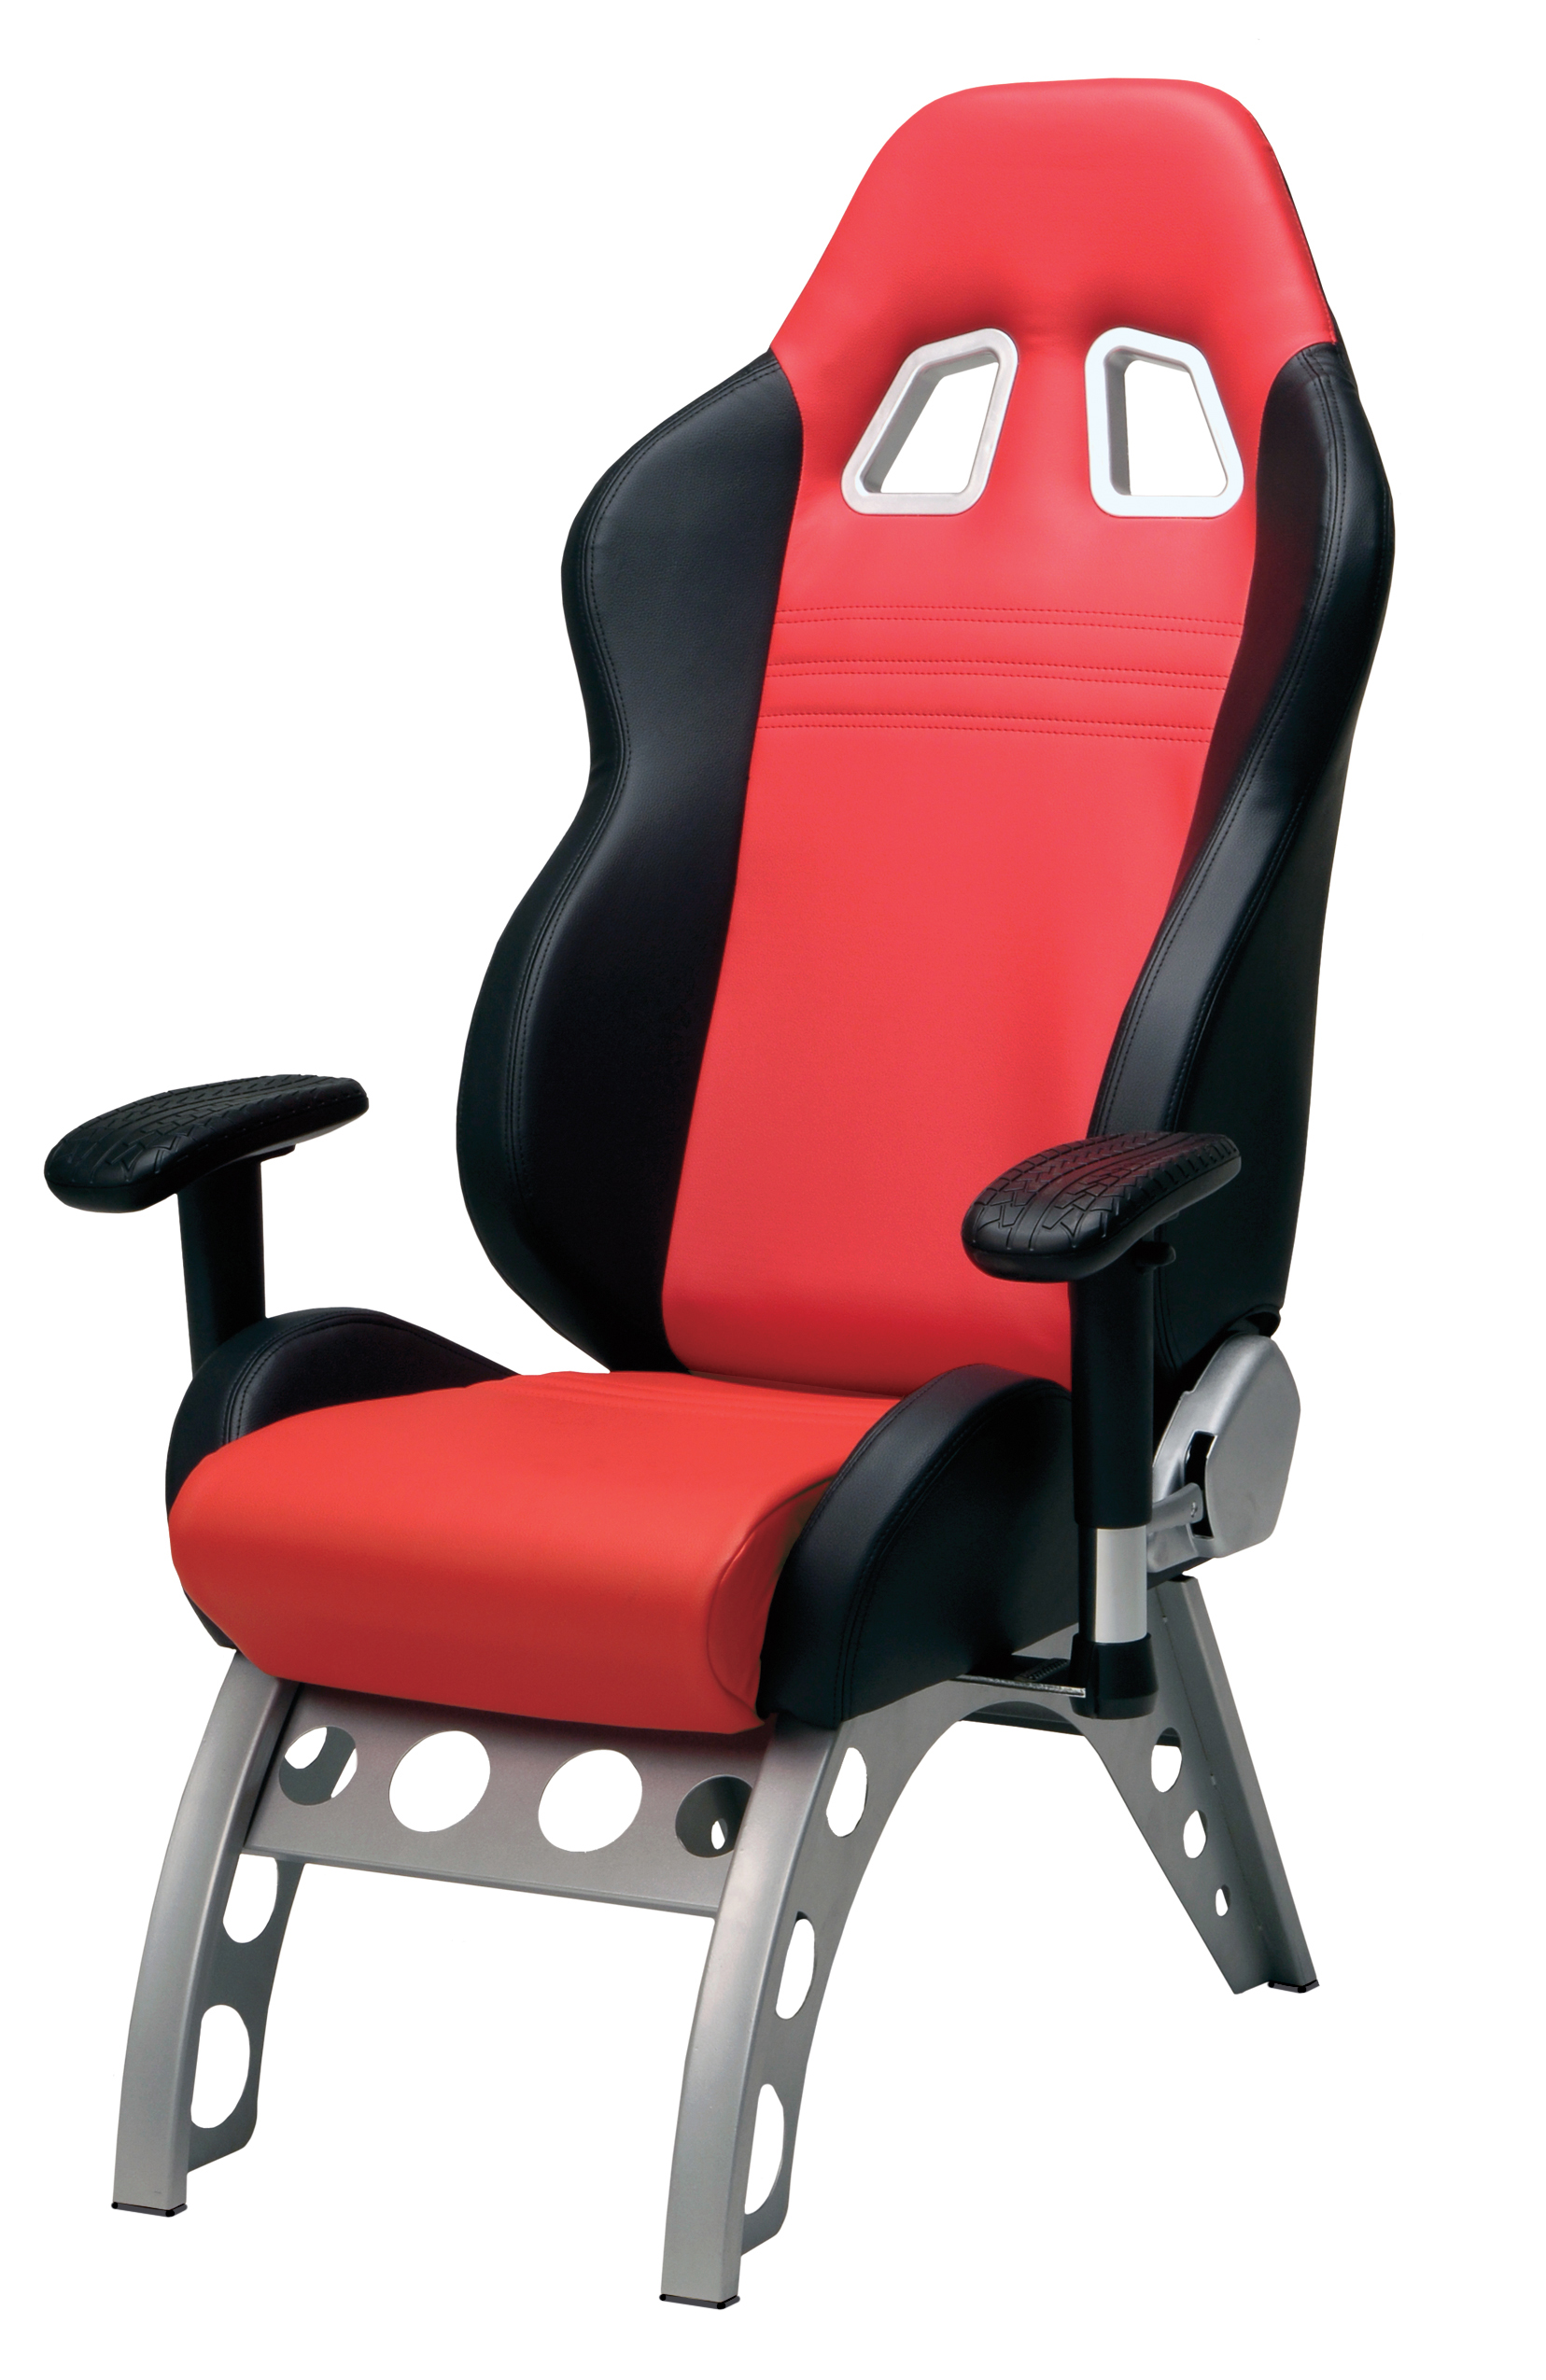 Intro-Tech Automotive, Pitstop Furniture, GT4000R Rec. Chair Red, Desk Chair